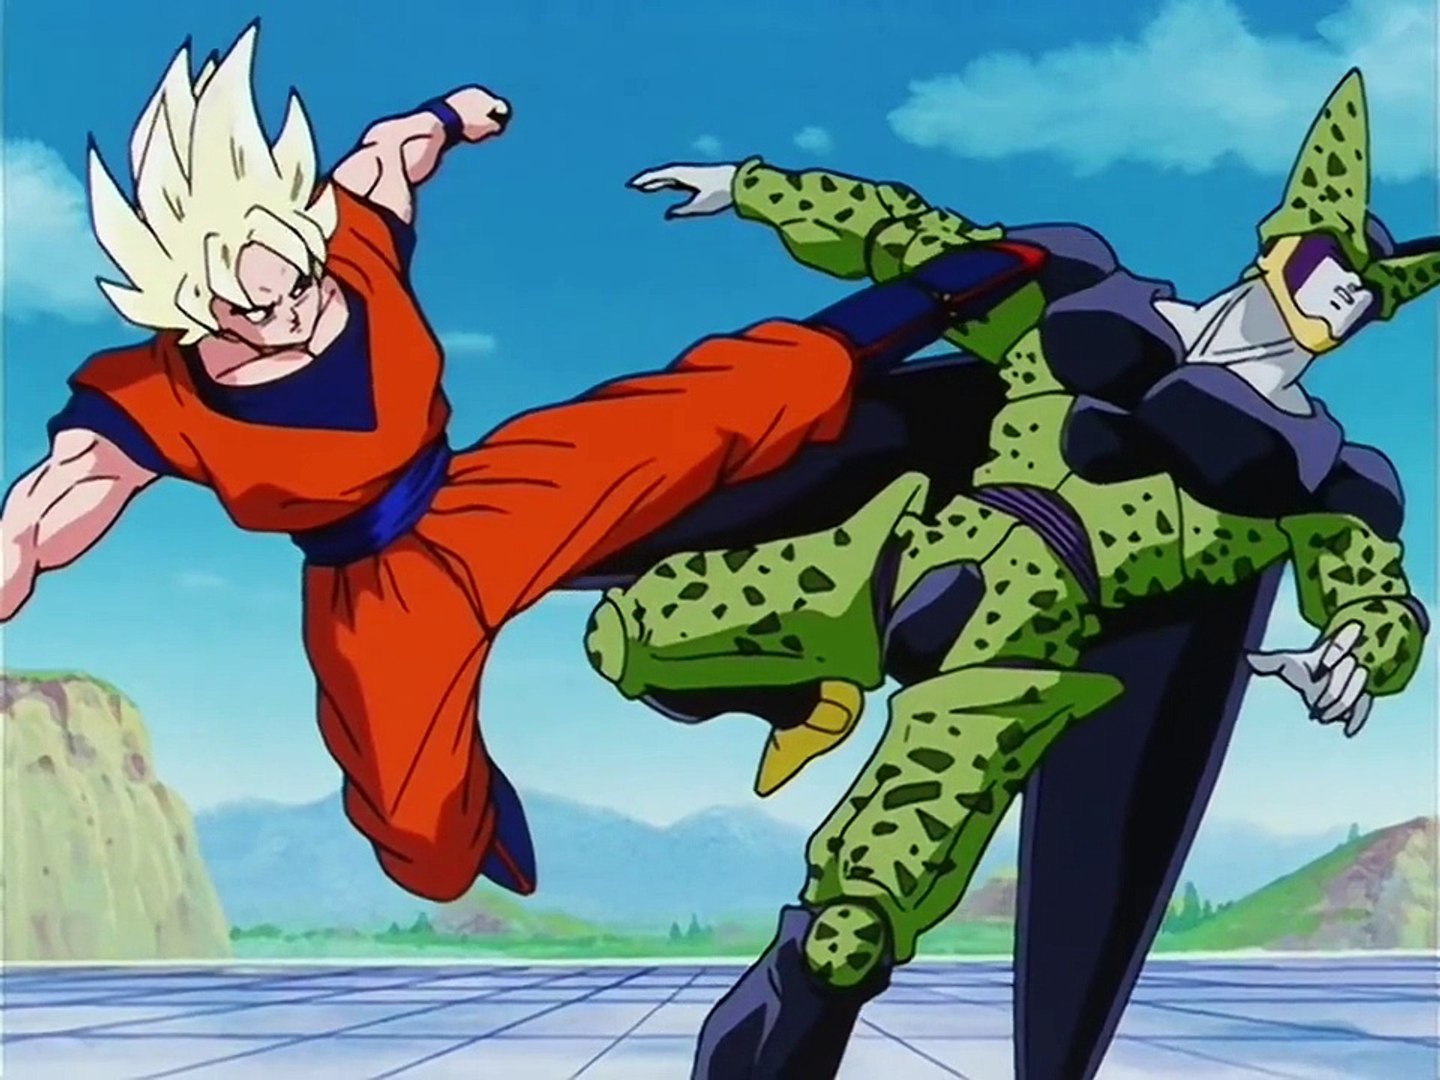 Goku vs Cell Full Fight [1080p HD] - video Dailymotion